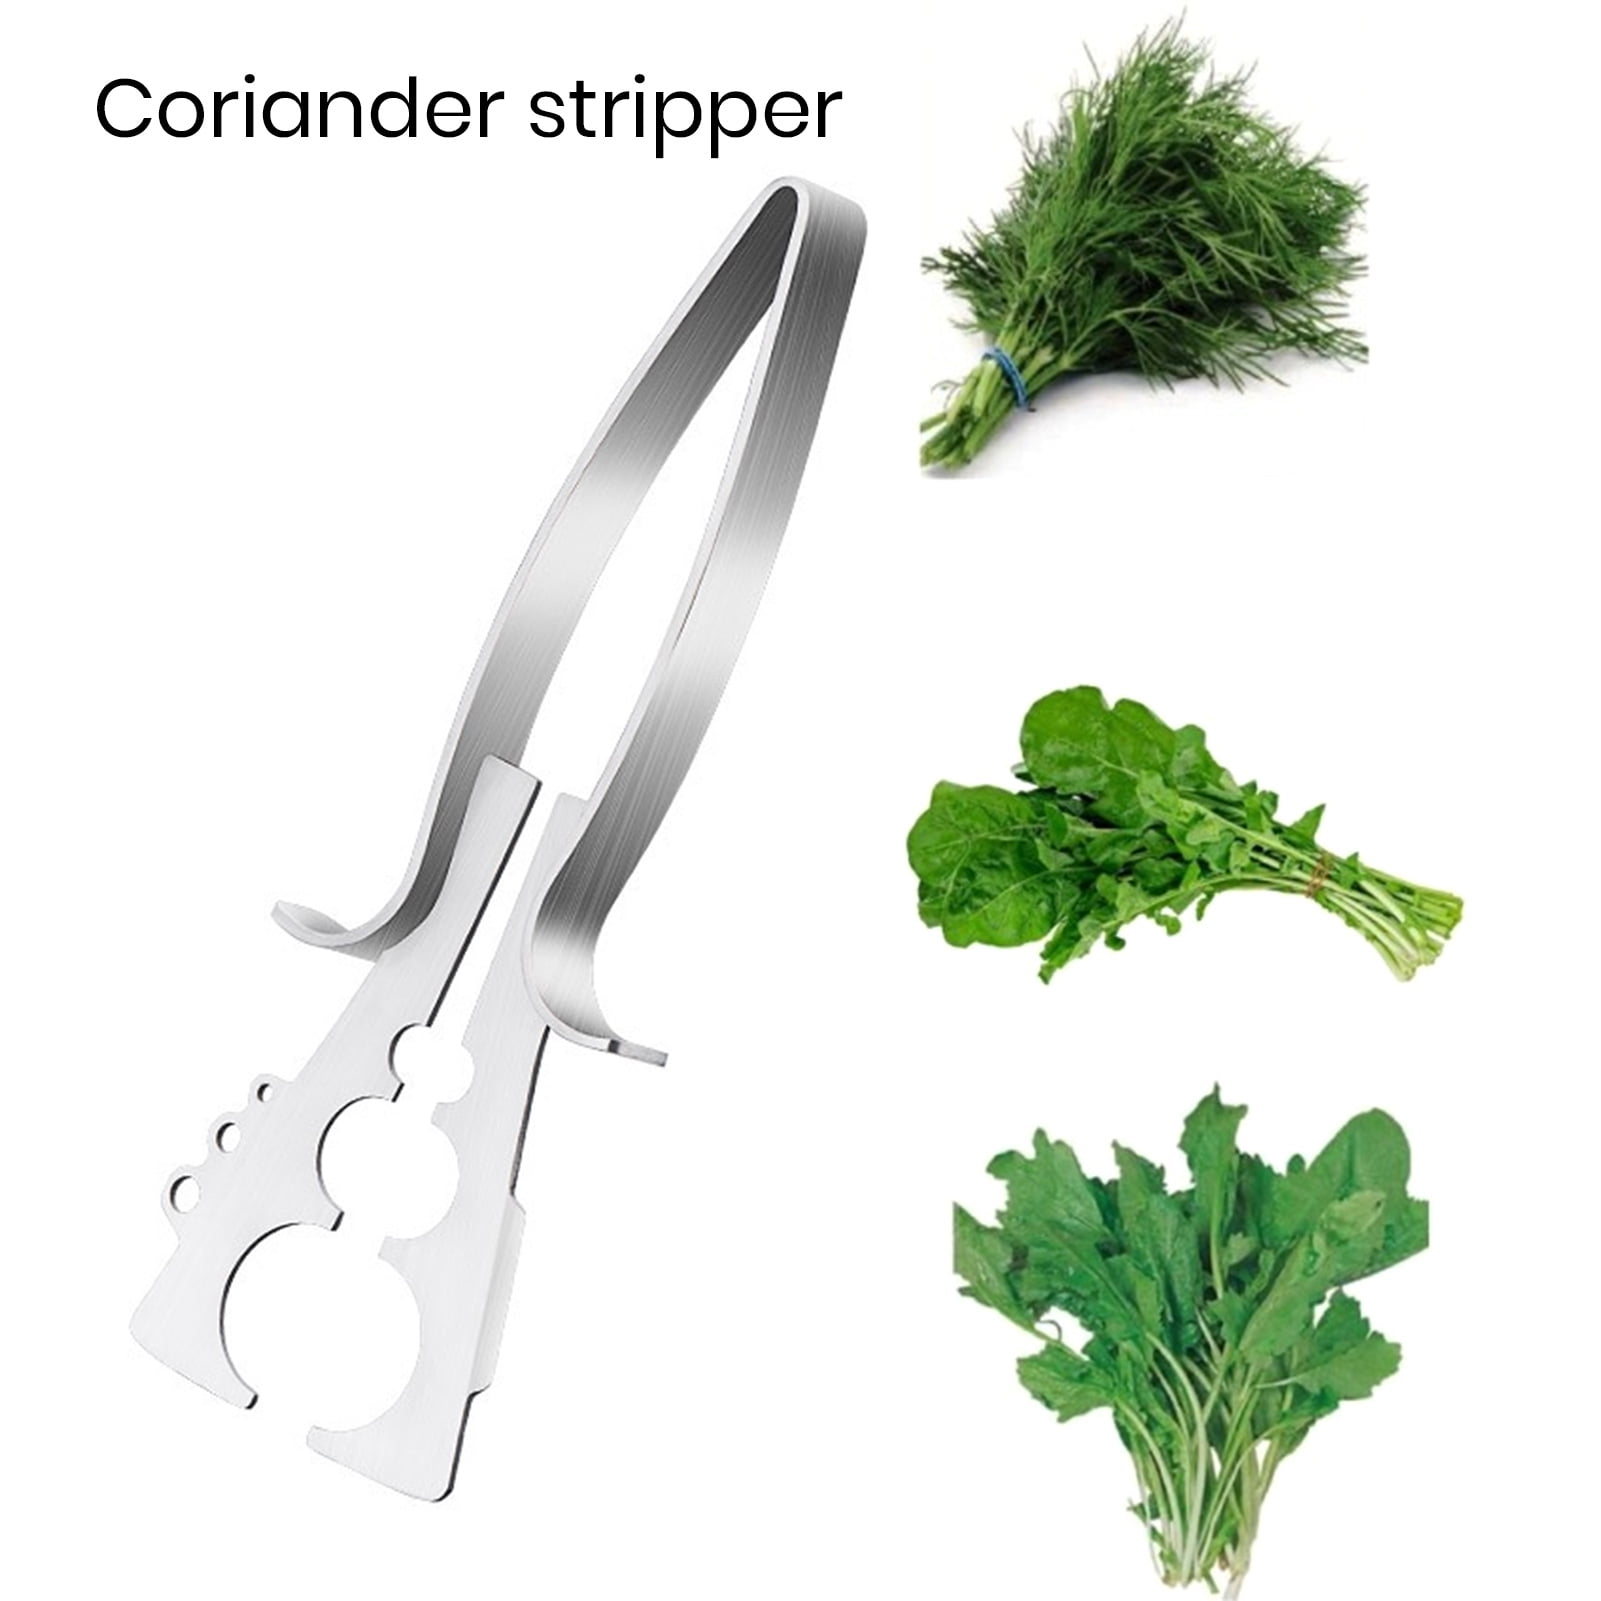 2pc lot ~ MICROPLANE SWIFTSTRIP + OXO HERB KALE TRIMMER STRIPPER COMB